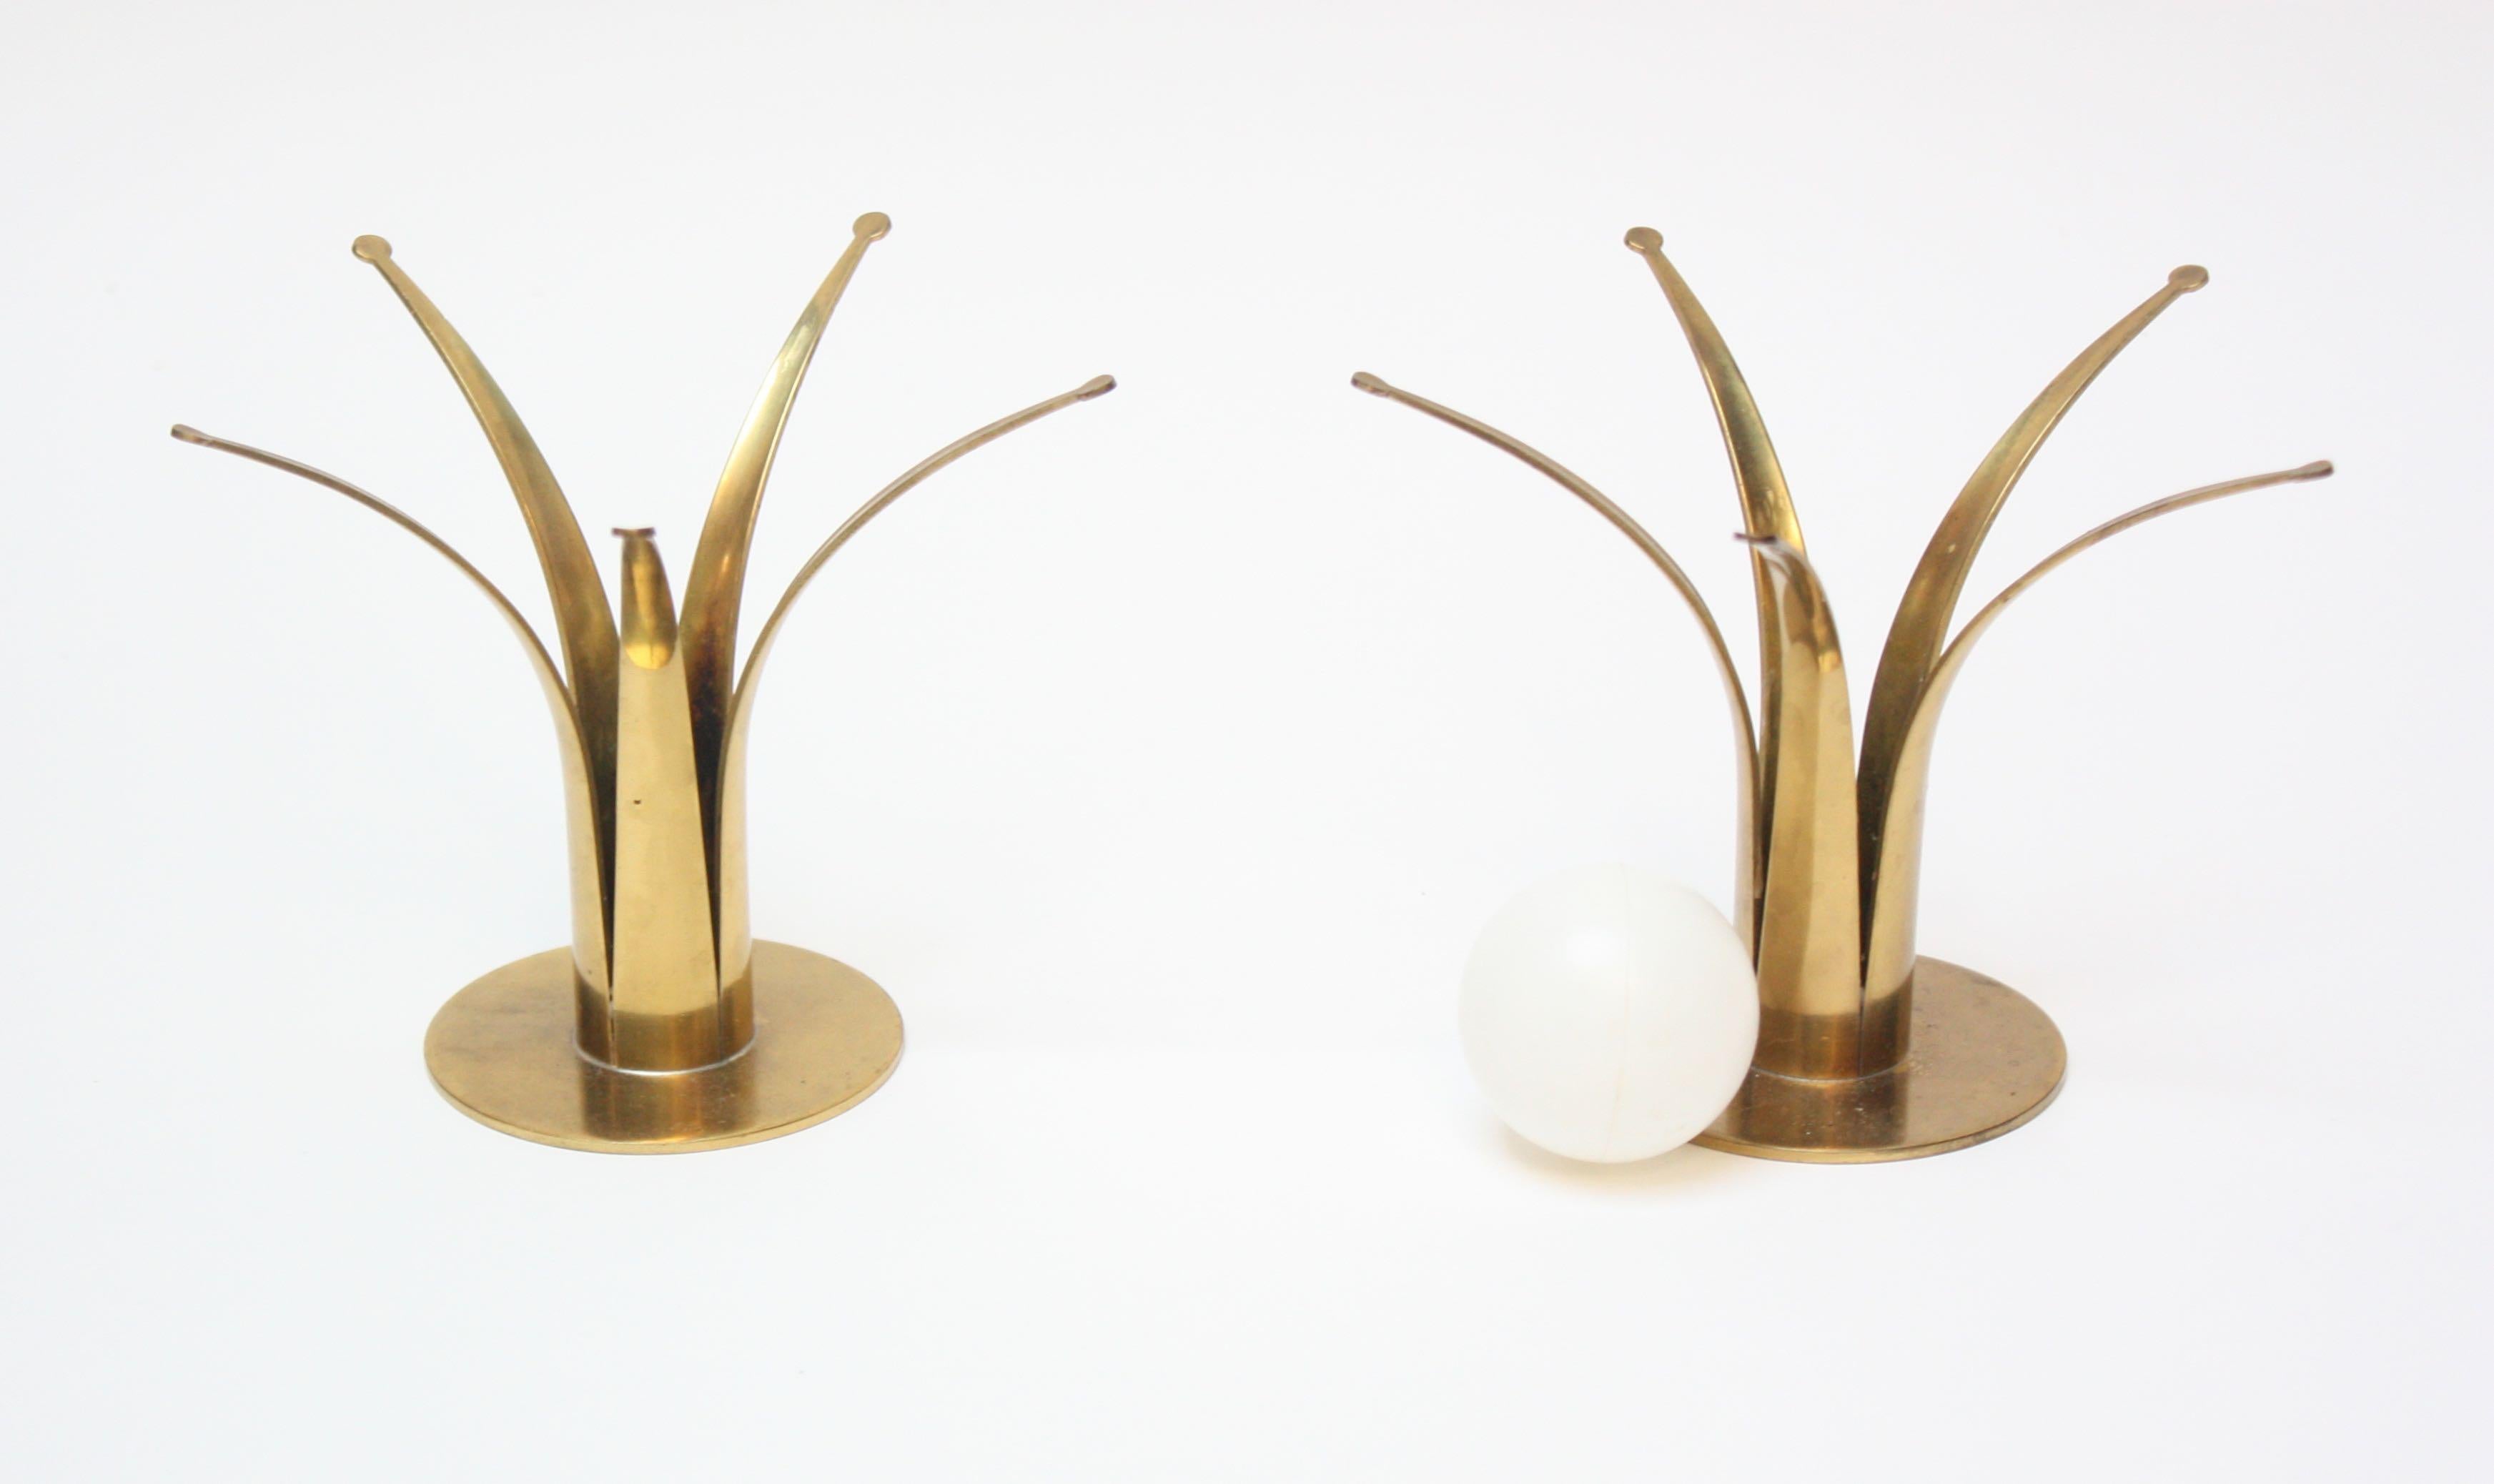 Pair of brass candleholders designed by Ivar Ålenius Björk for Ystad Metall in the 1950s. A more detailed / scarce variation of Björk's more ubiquitous 'lily' or 'liljan' design. Very nice, polished condition. Though, the pair has not been lacquered